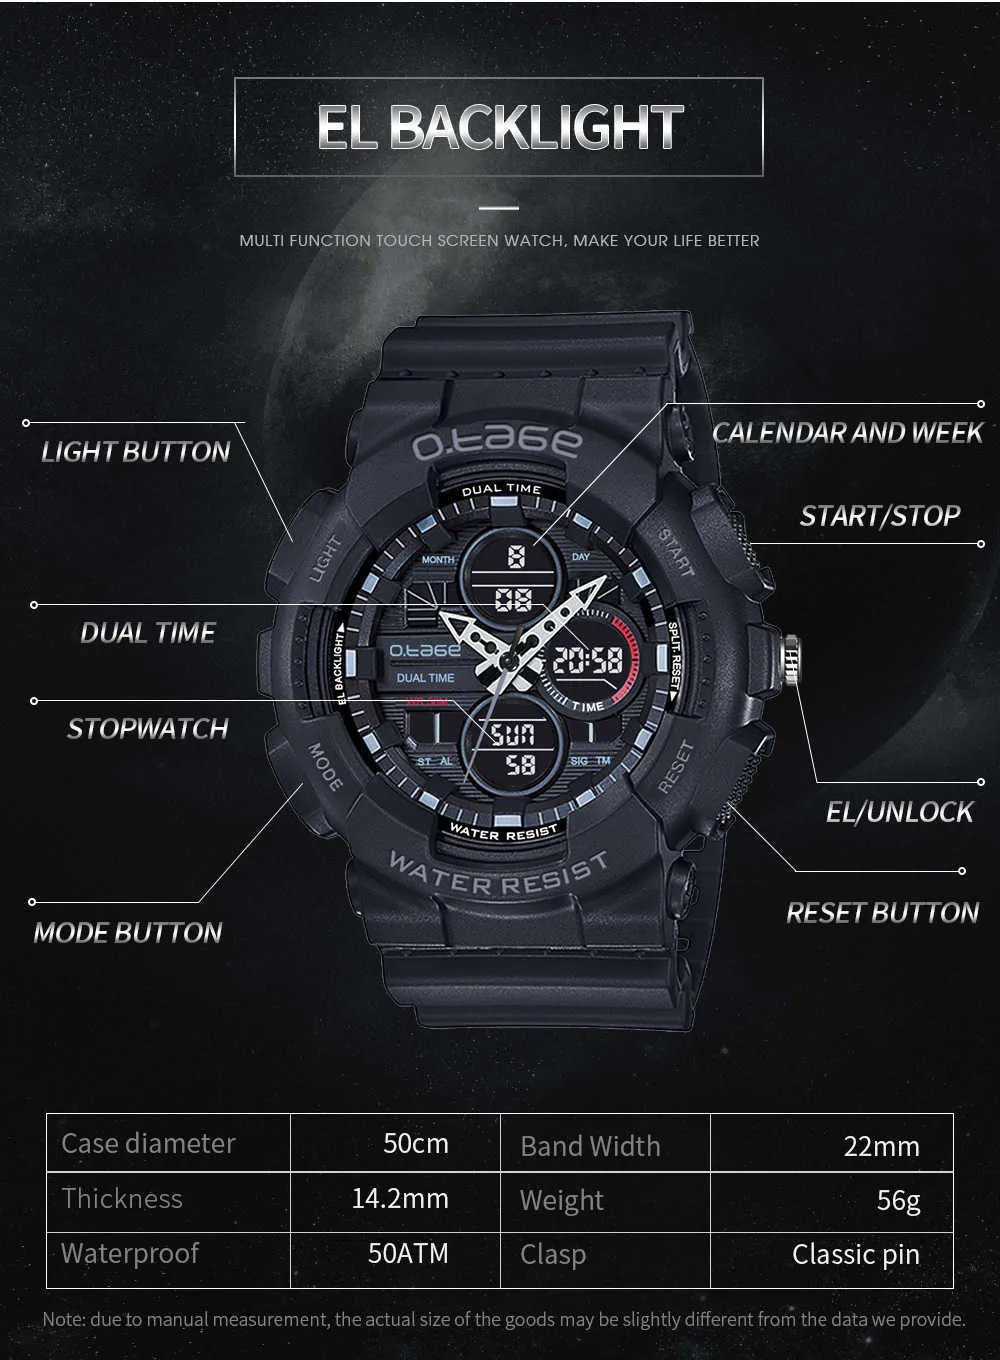 O.TAGE MENS Digital Sports Casual Dual Display Multi-Functions Tactical Wrist Watch G1022